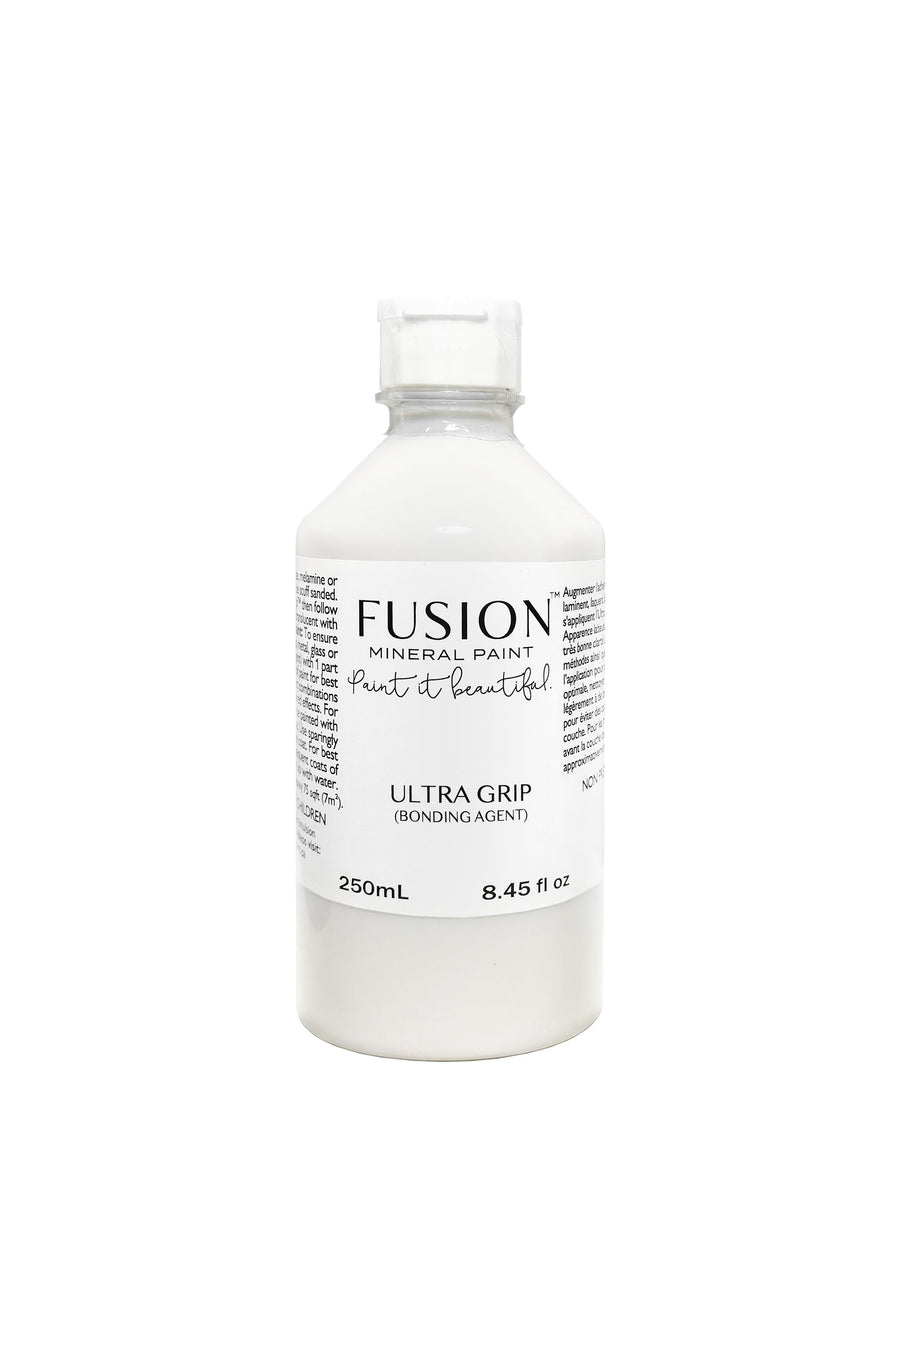 Fusion Mineral Paint Ultra Grip 250ml